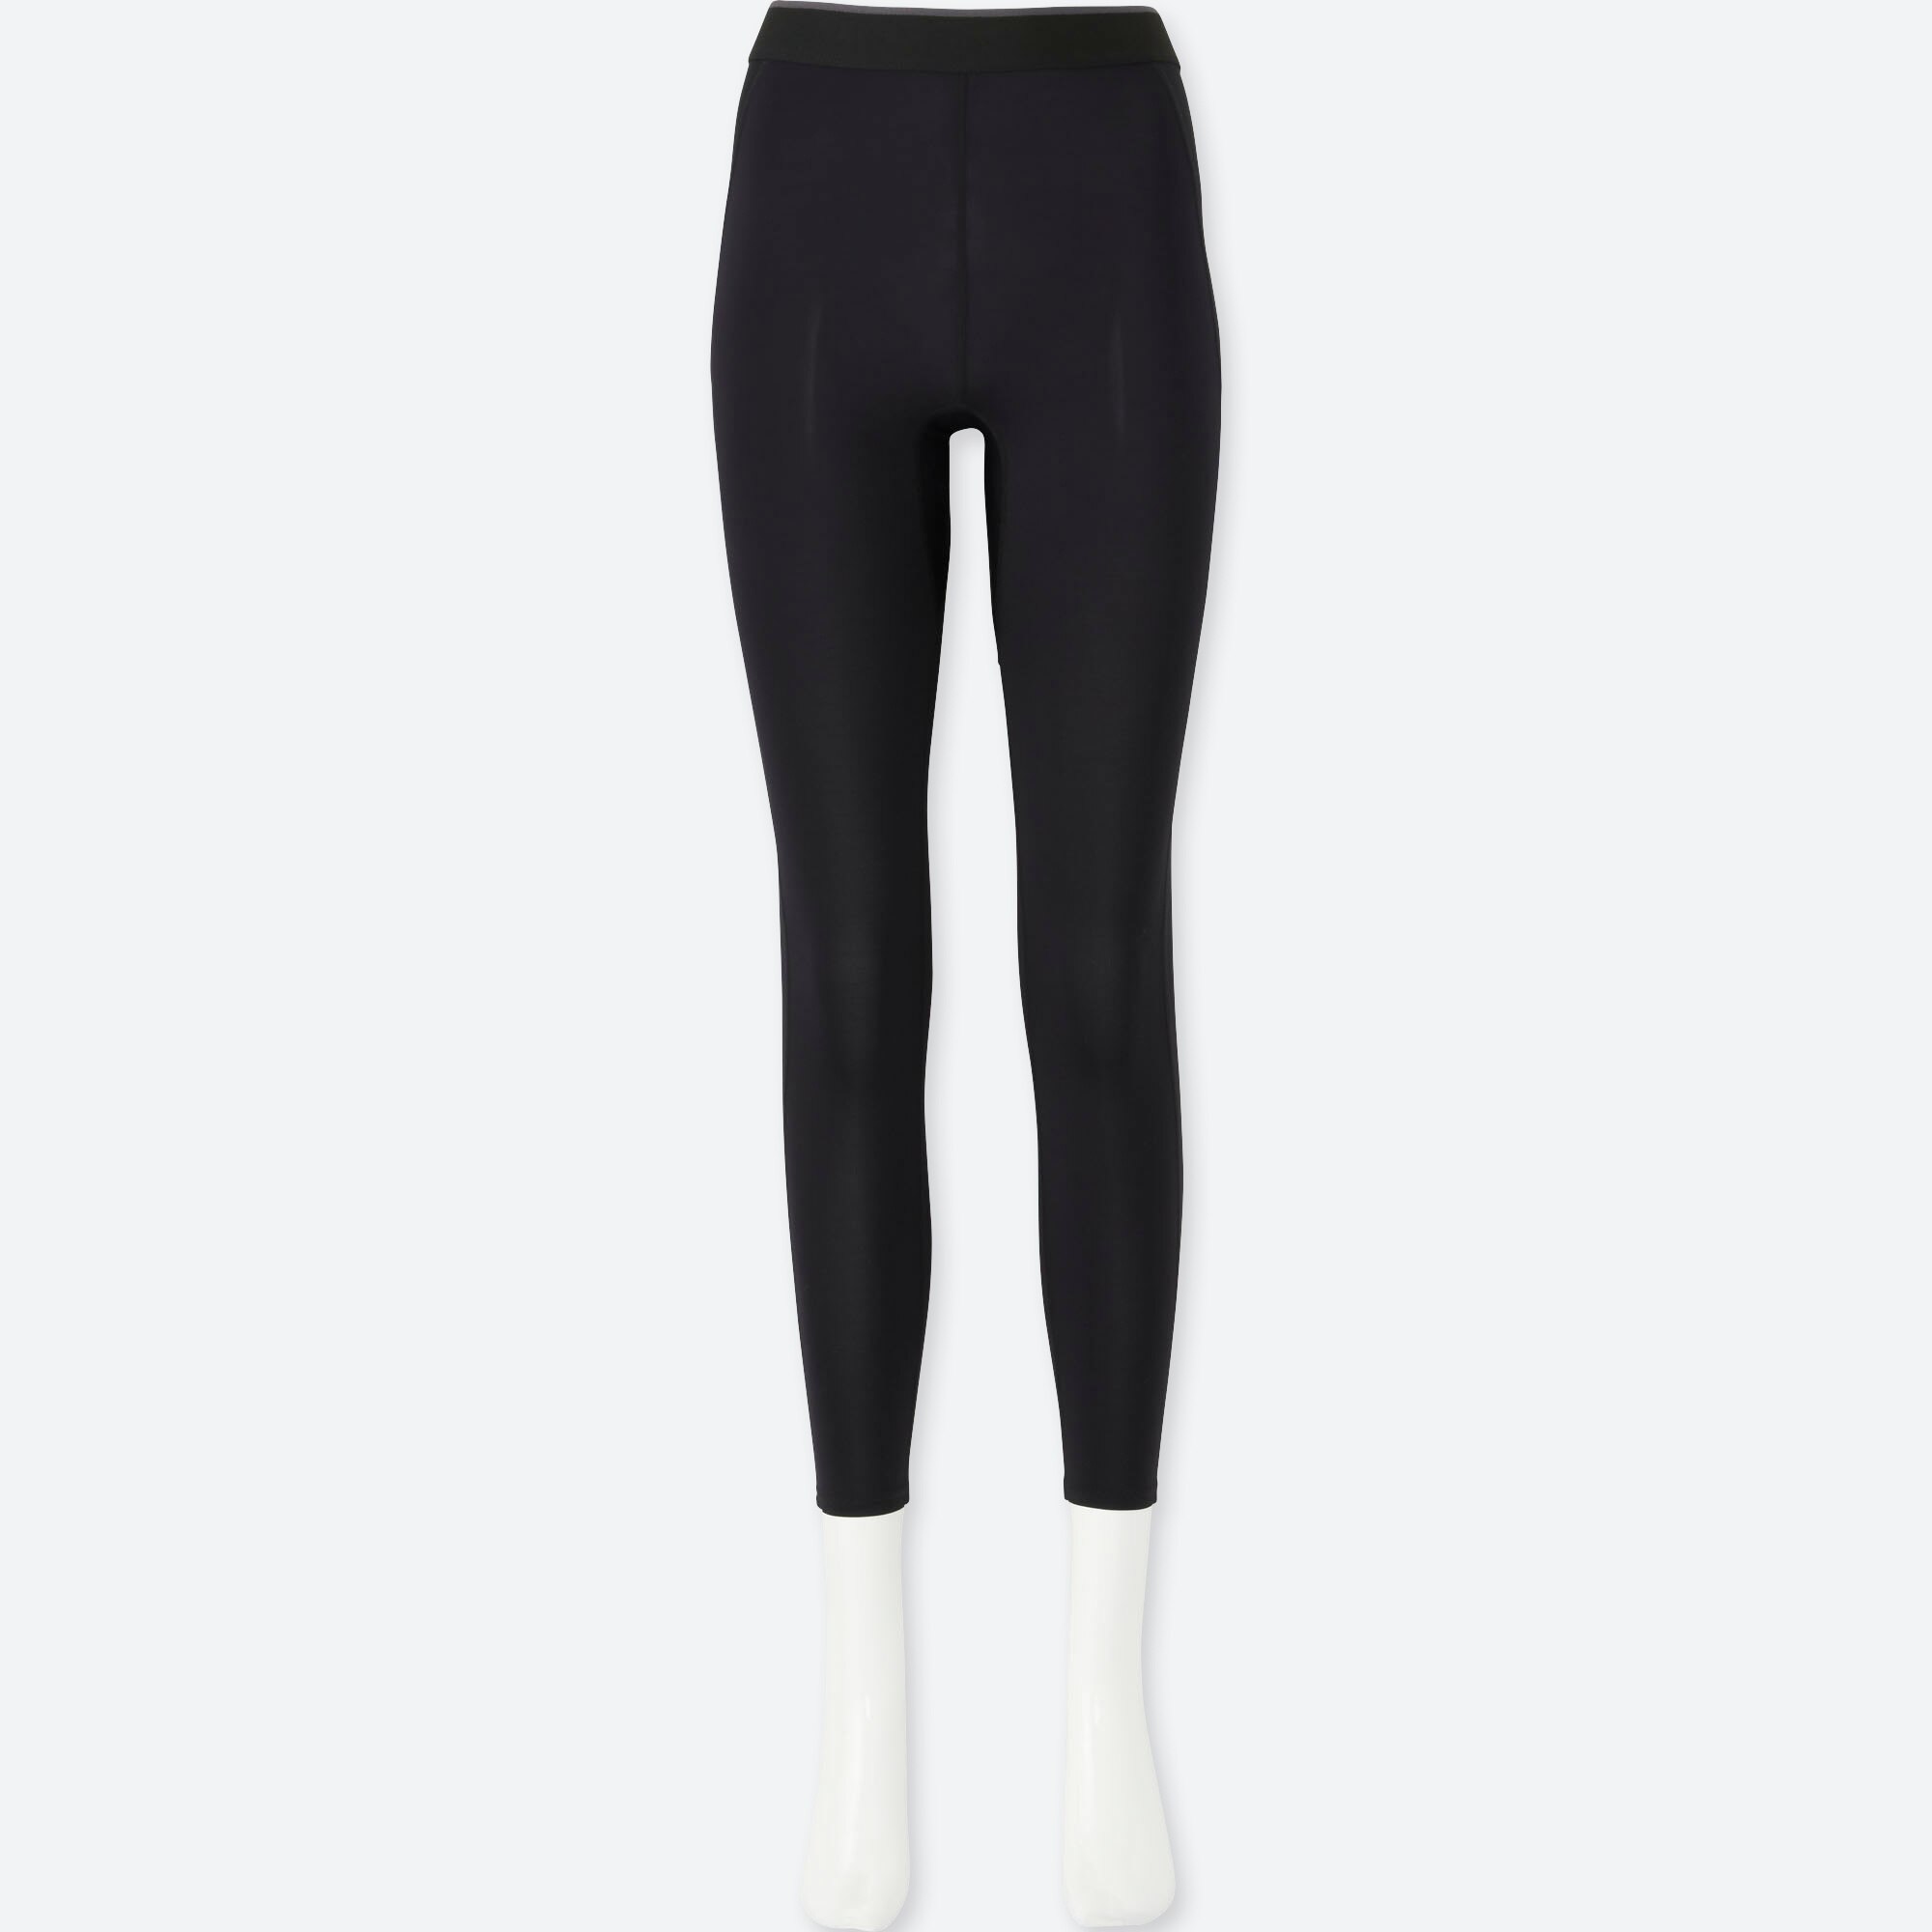 Uniqlo, Airism Performance Support Tights